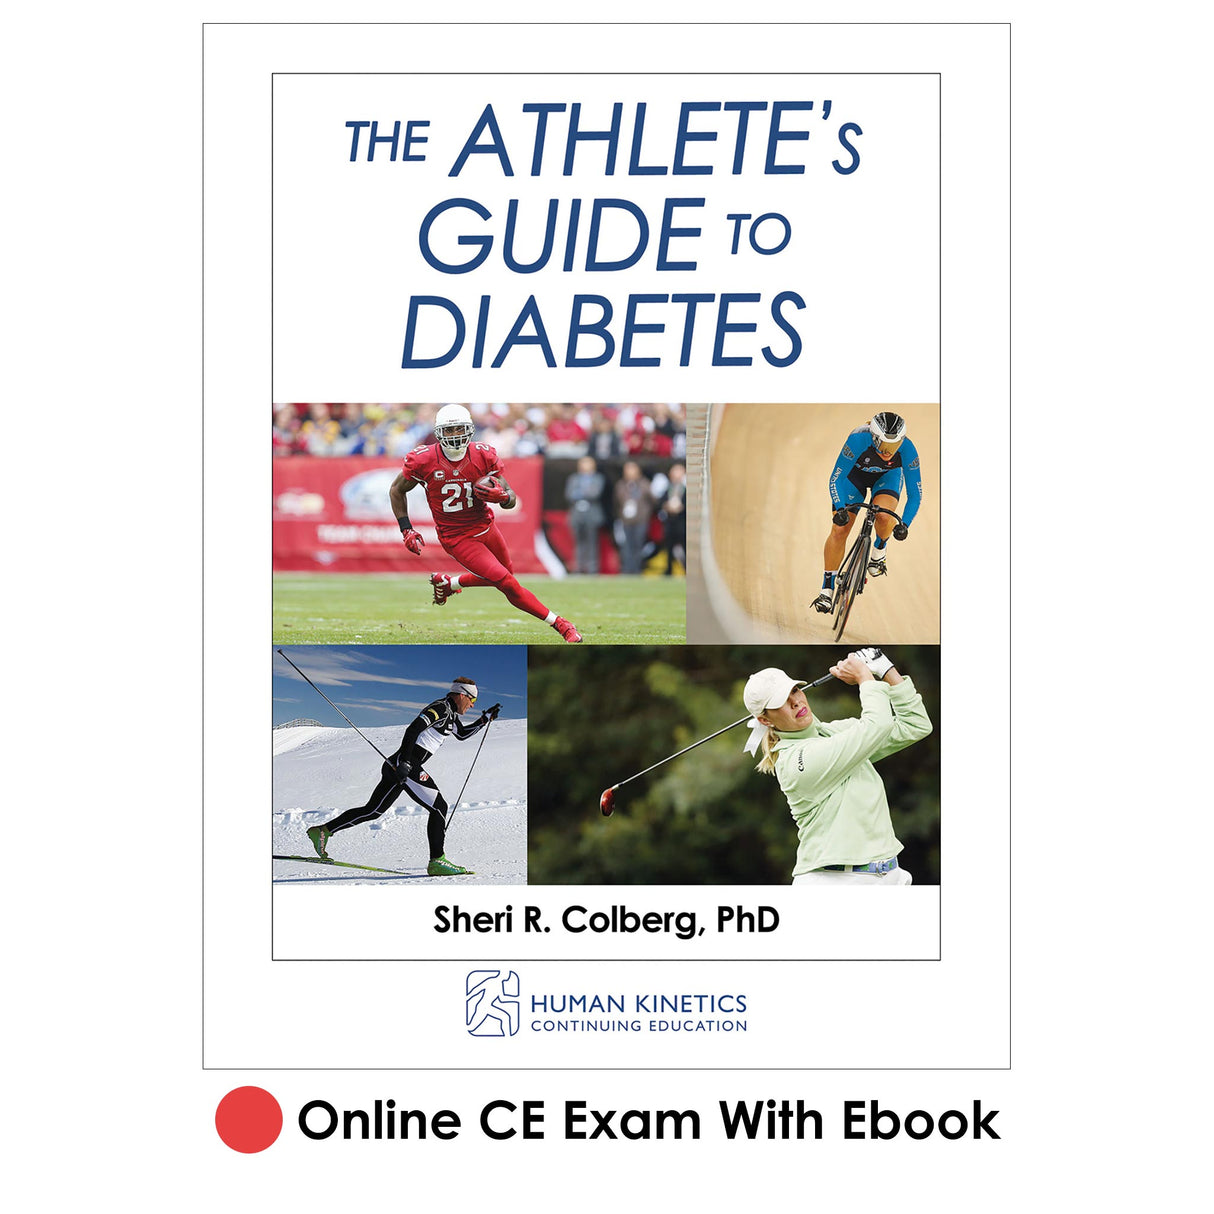 Athlete's Guide to Diabetes Online CE Exam With Ebook, The